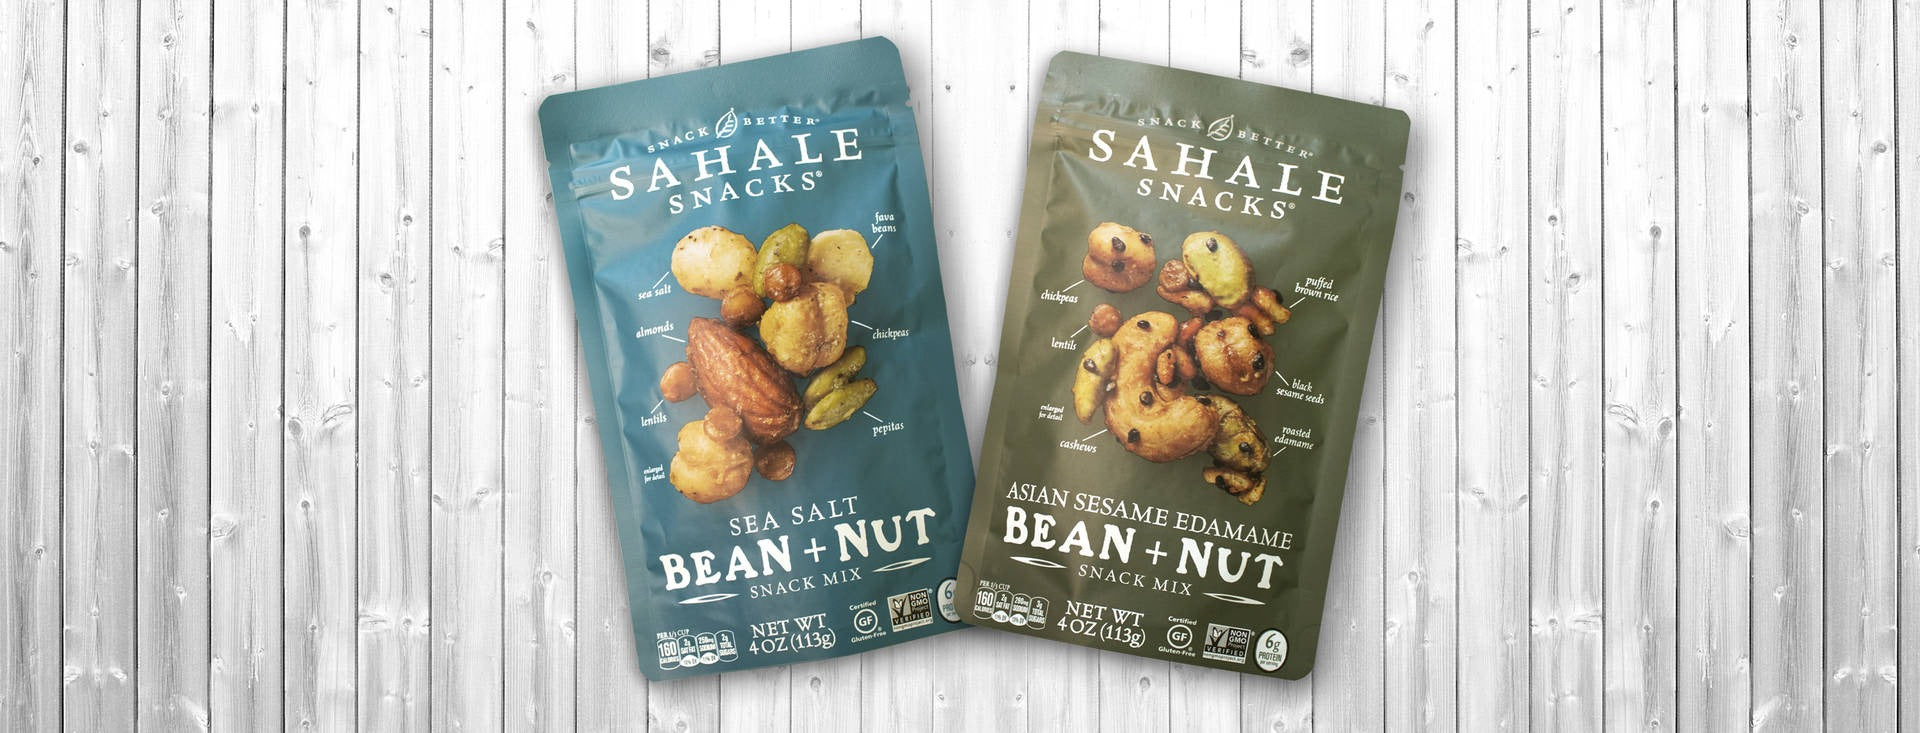 Bean & Nut Snack Mixes collection image